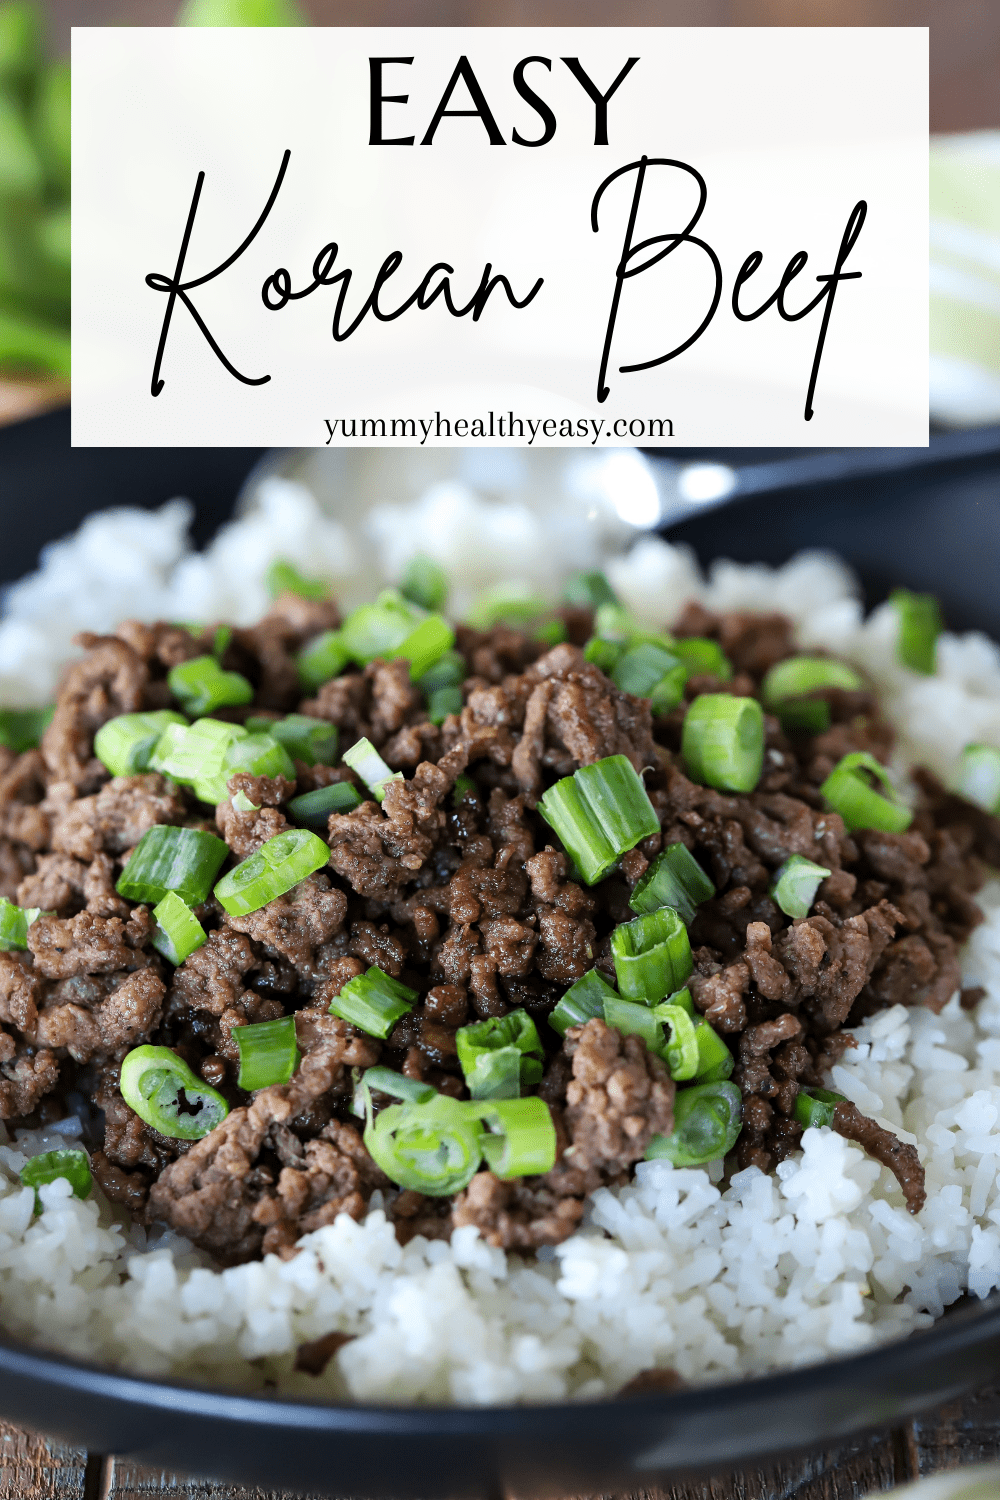 This is the most amazing Korean Beef Recipe that you only need a few ingredients to make. It's so easy! Serve it over rice and you have dinner done in under 30 minutes! Only SIX ingredients! #dinner #dinnerrecipe #recipe #beef #yummy #easy #yummyhealthyeasy via @jennikolaus